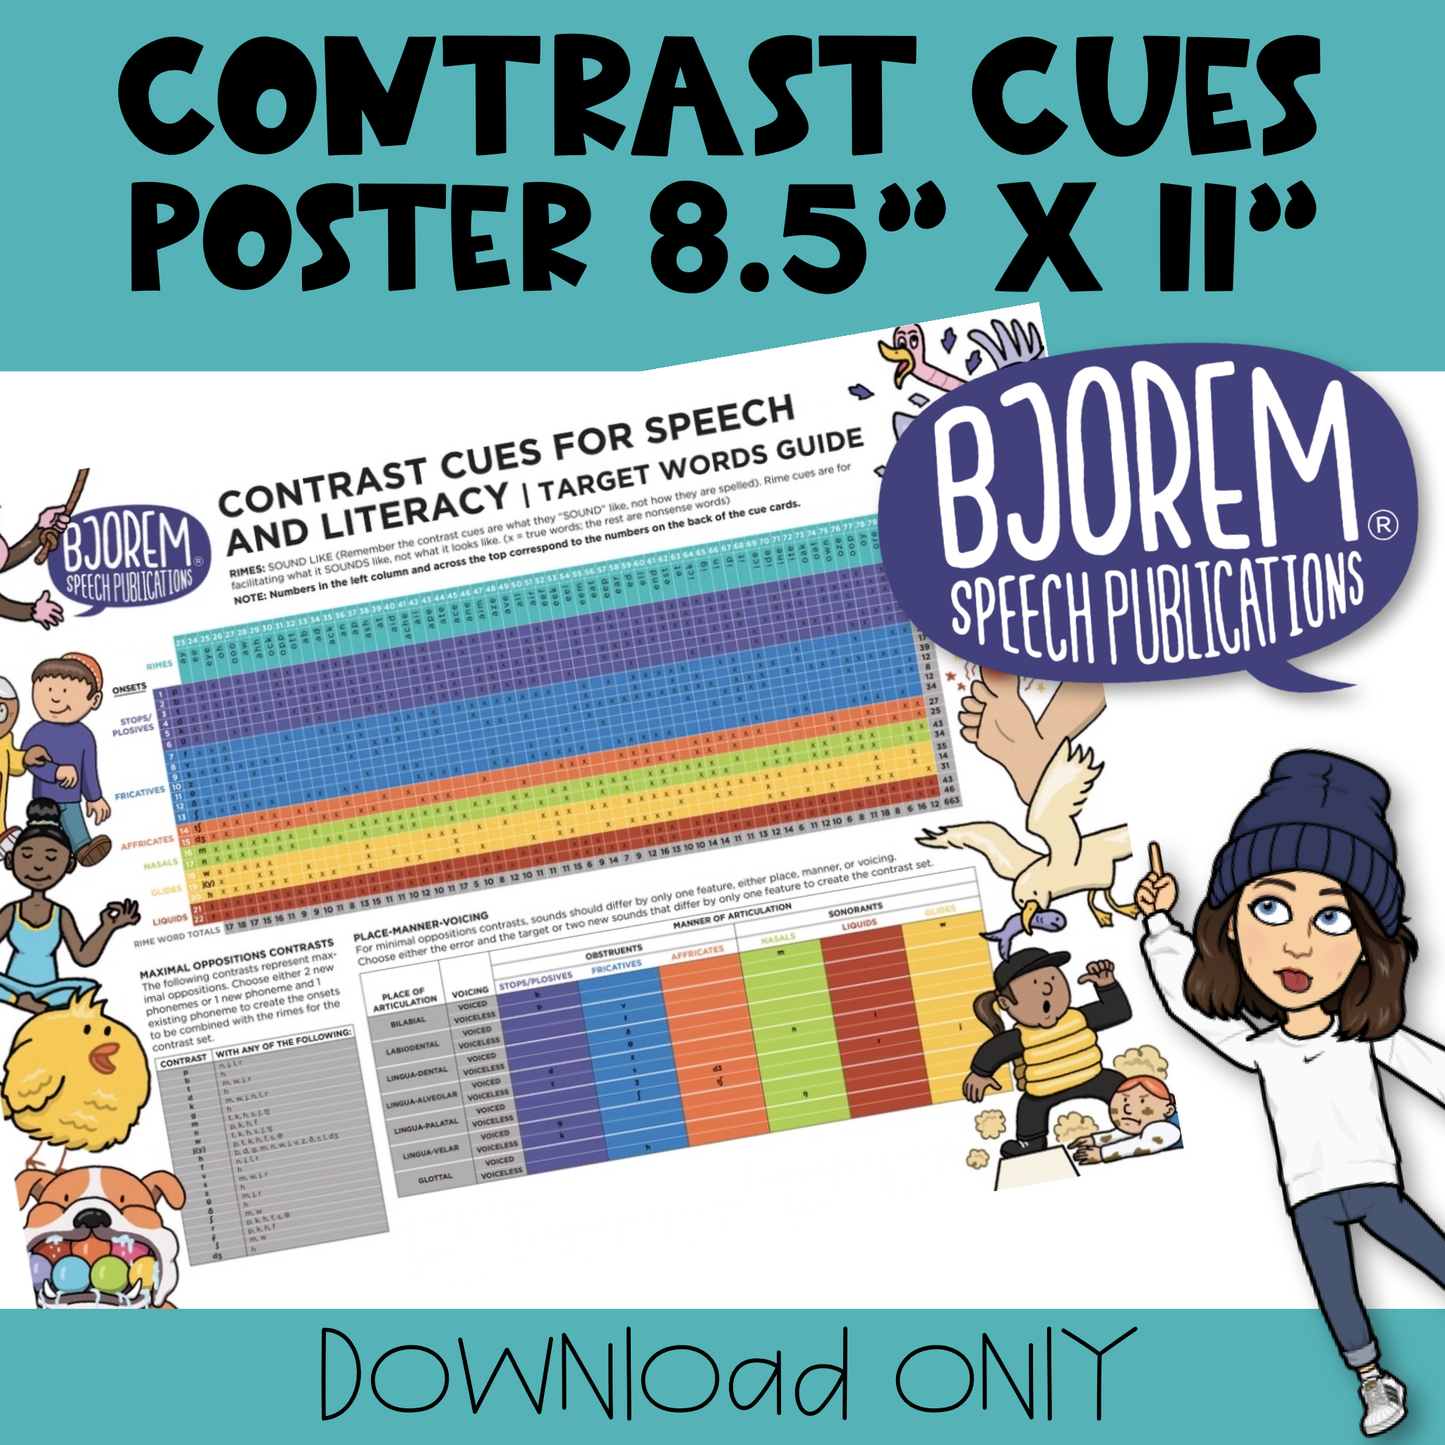 [title]Contrast Cues for Speech & Literacy POSTER - Download